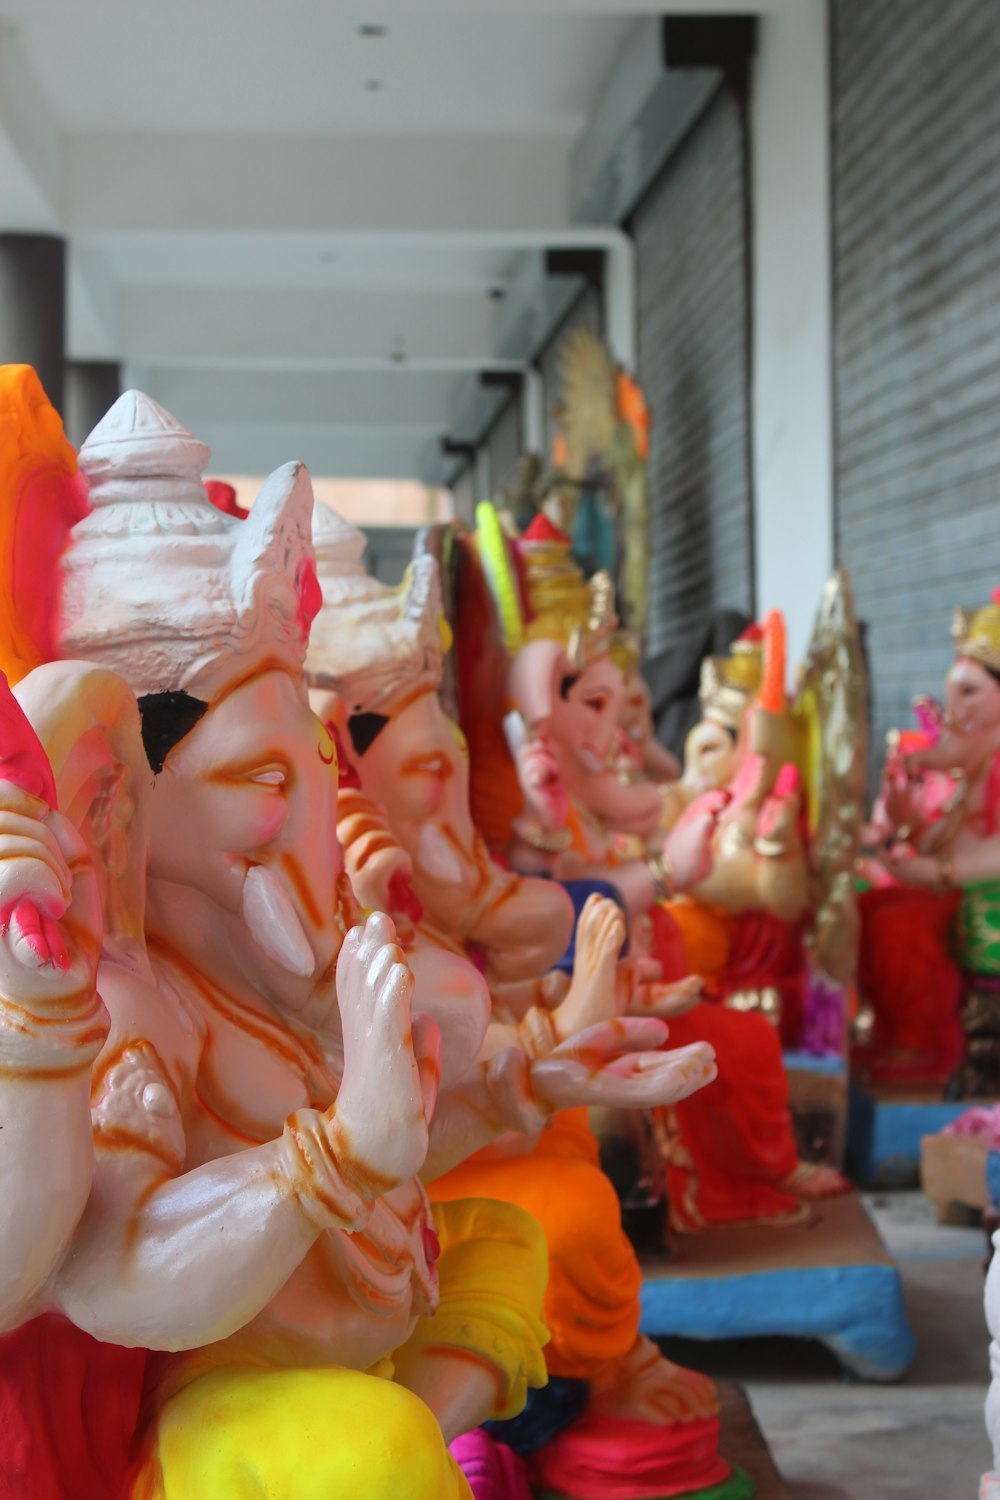 a group of small statues of hindu deities